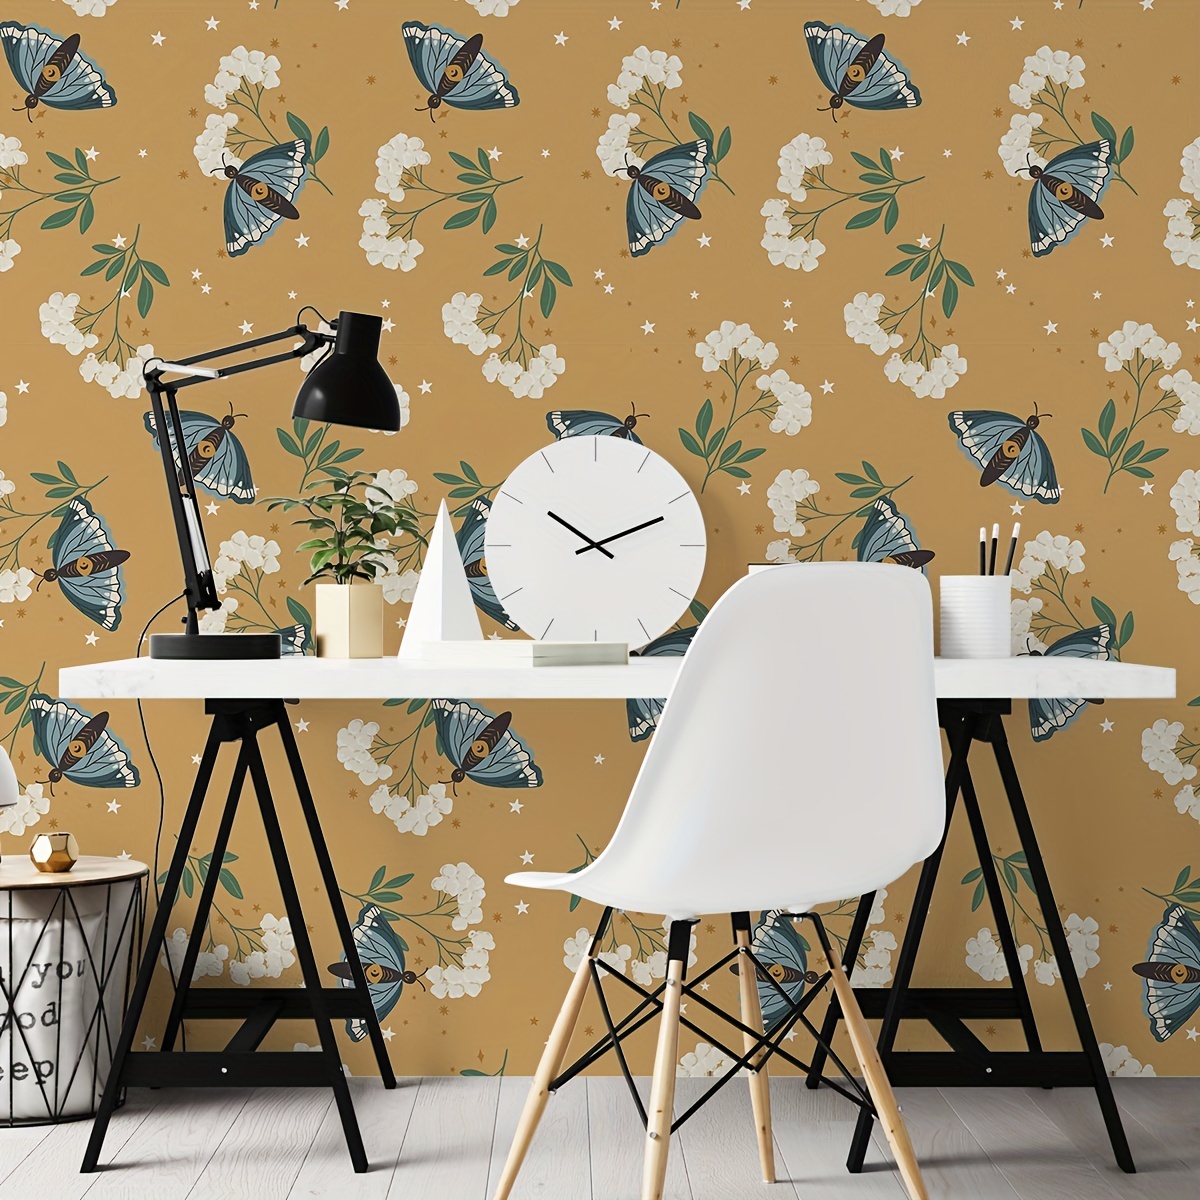 Dandelion and Butterflies Wallpaper Peel and Stick Wallpaper -    Removable wall murals, Butterfly wallpaper, Peel and stick wallpaper